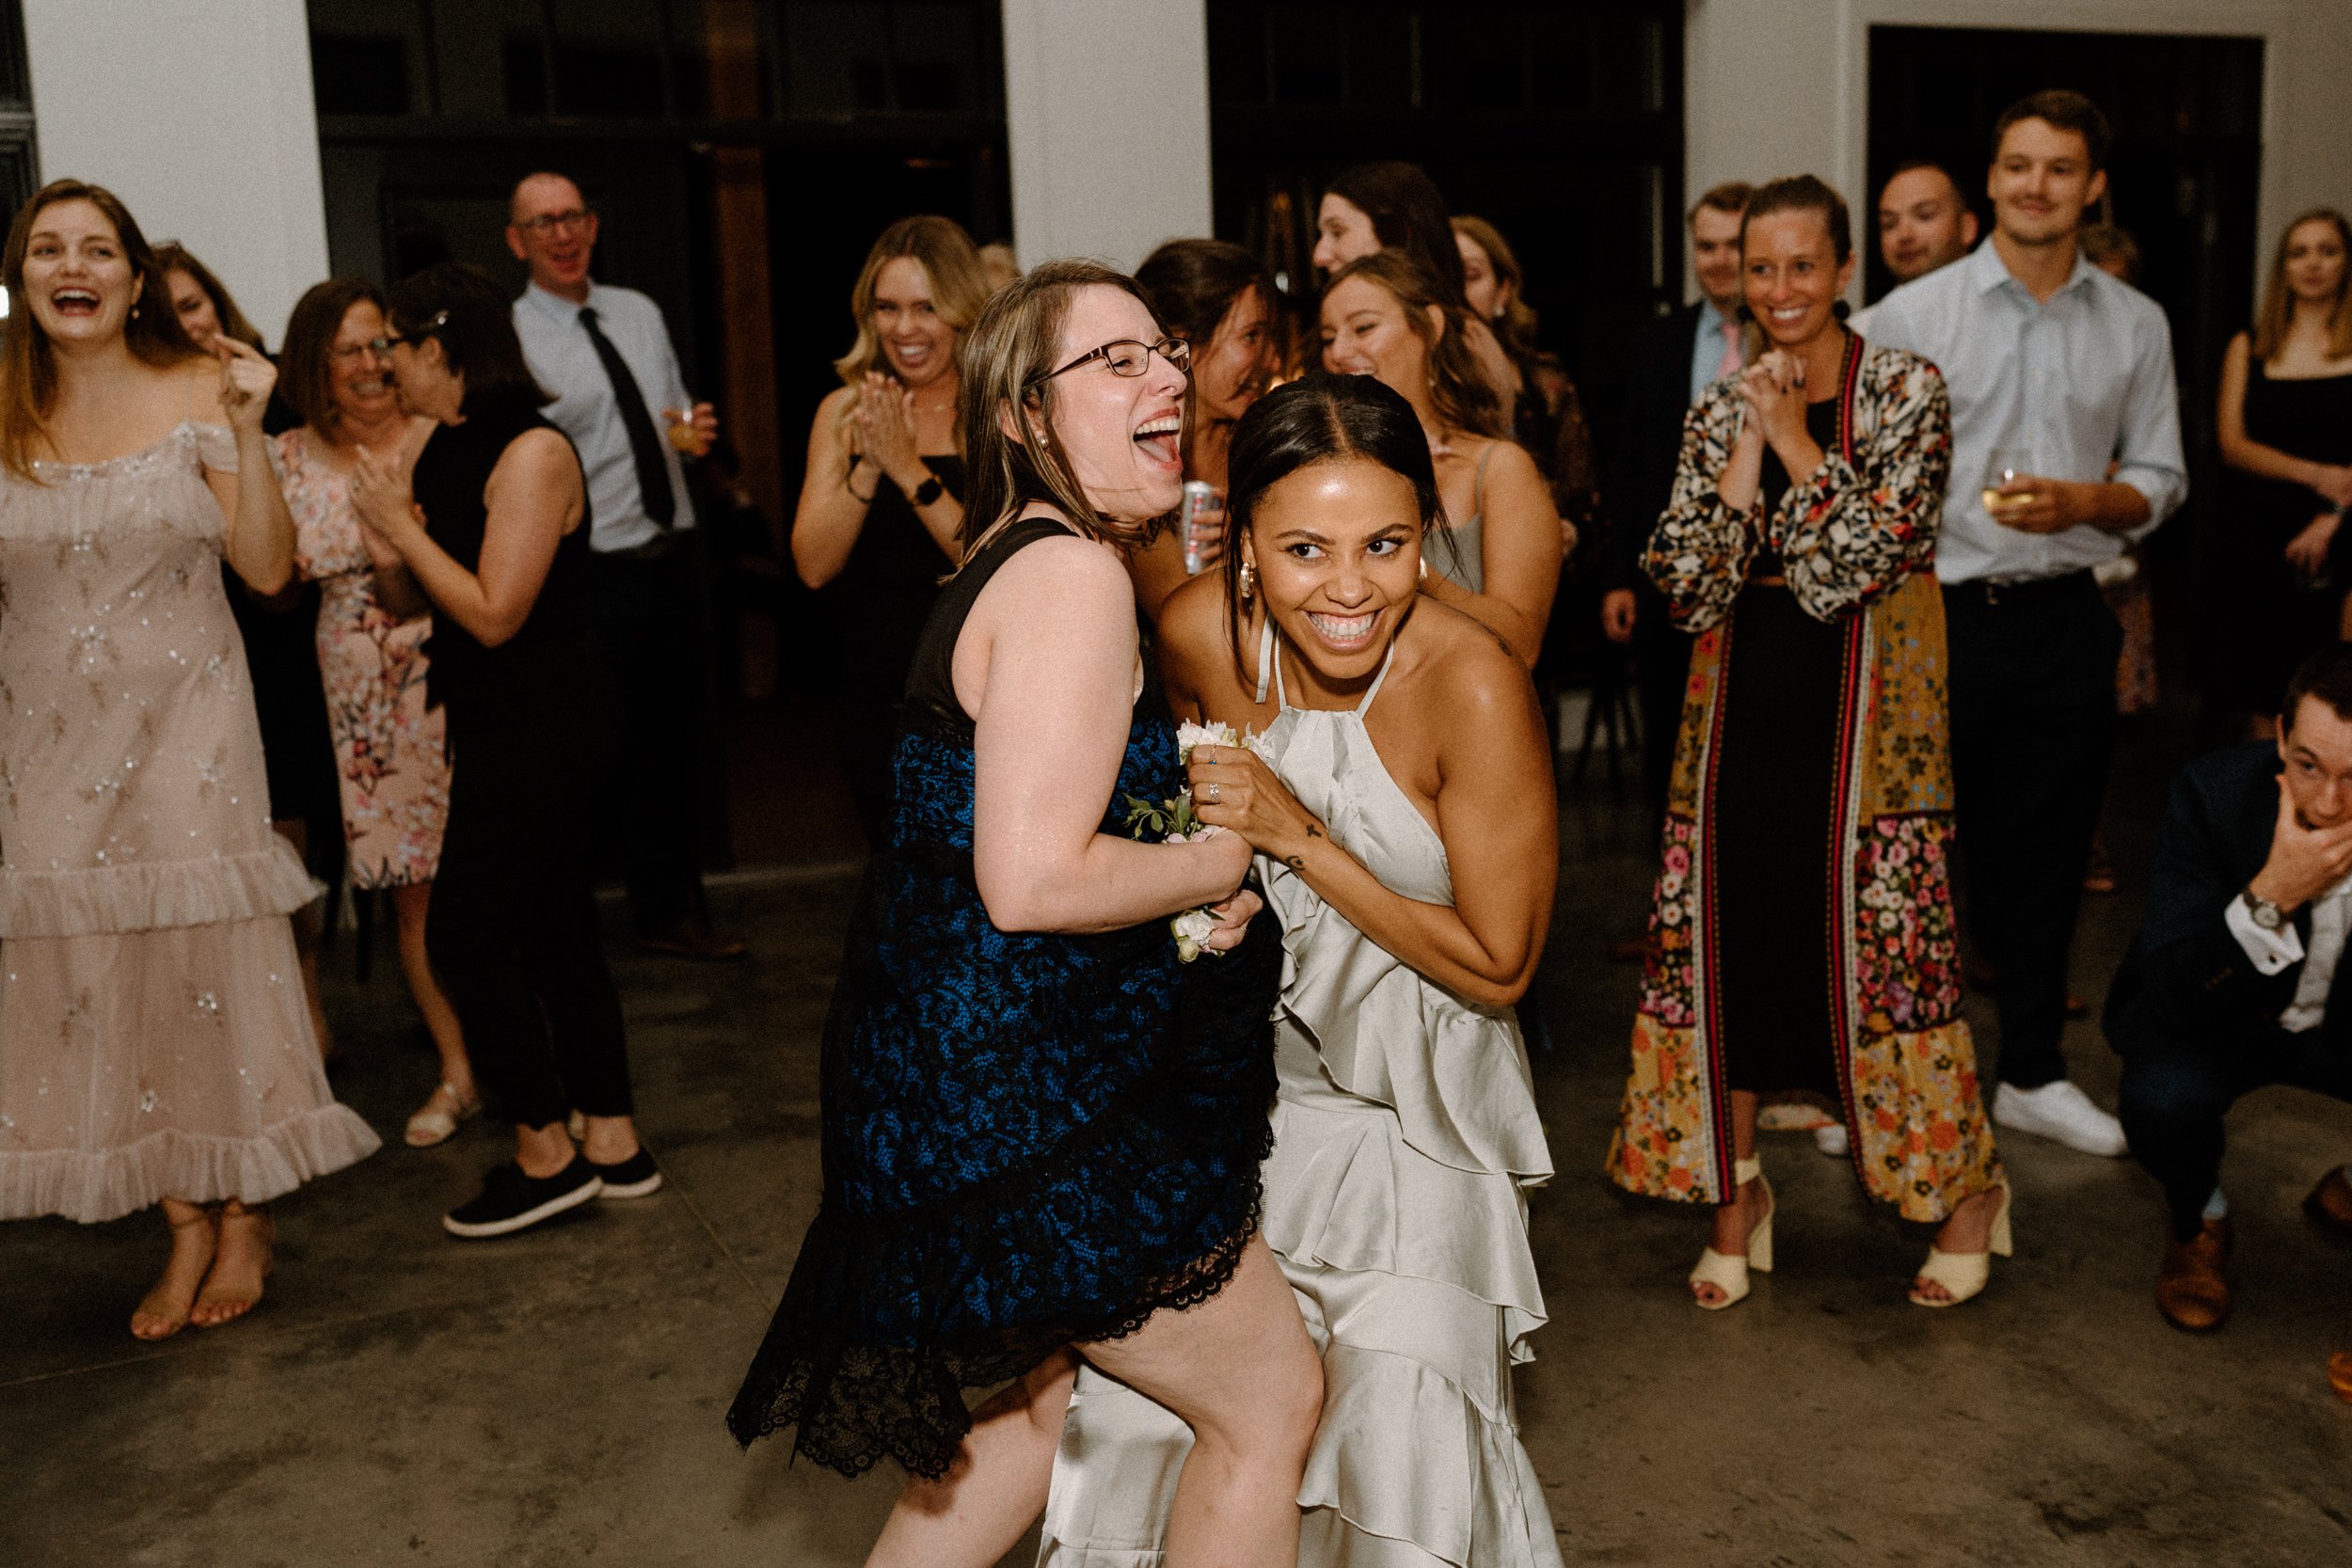 Wedding guests dance together on the dance floor